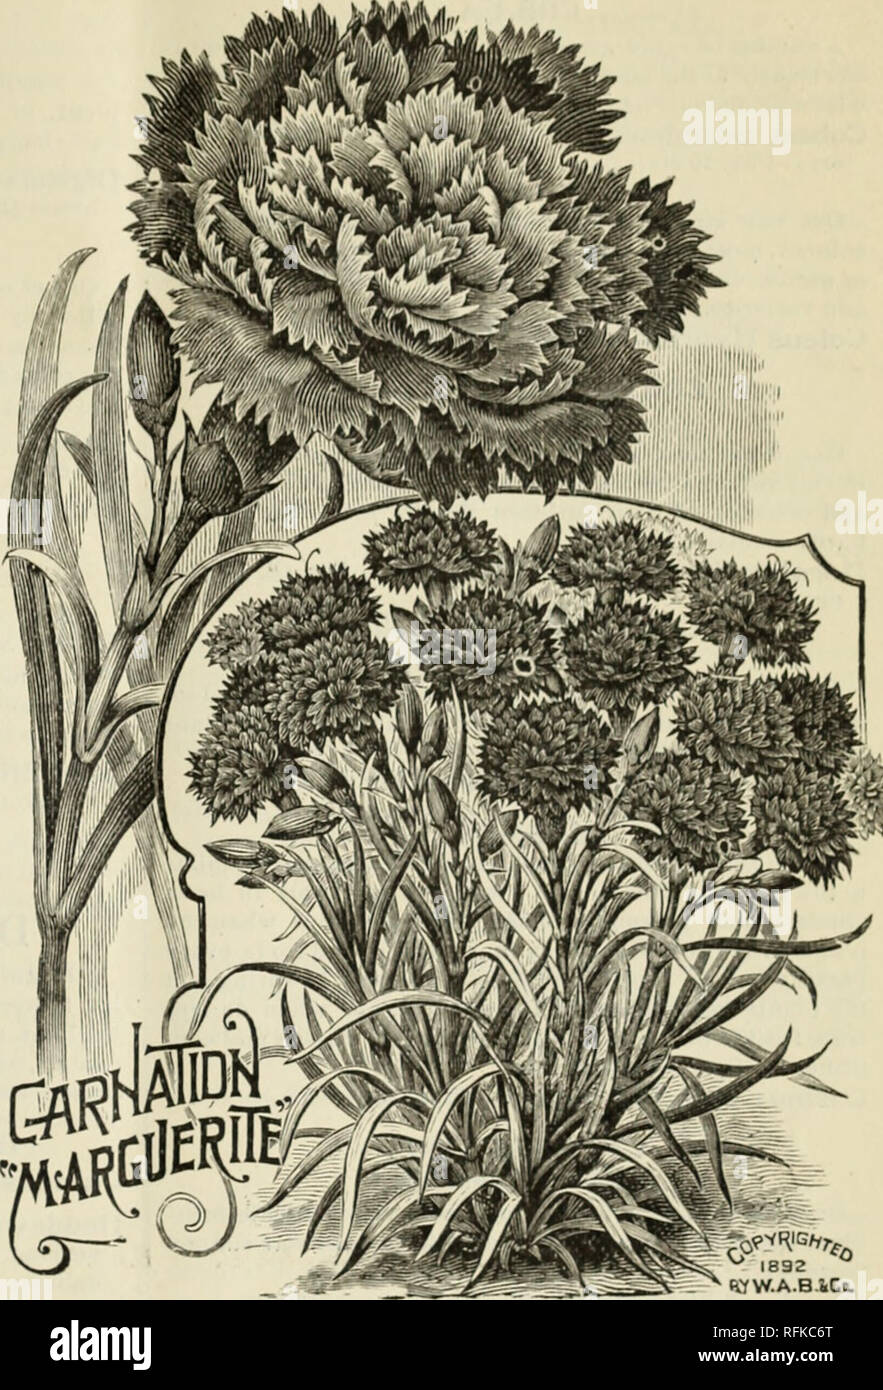 . Annual descriptive catalogue. Nursery stock Texas Dallas Catalogs; Vegetables Seeds Catalogs; Flowers Catalogs; Plants, Ornamental Catalogs; Nursery stock; Vegetables; Flowers; Plants, Ornamental. V 1892 PtfW.A.B iCa. Chrysanthemum Frutescens Grandiflorum. (&quot;The Mar- guerite&quot; or &quot;faris Daisy.&quot;) Immense quantities are grown by French florists, and|rind a ready sale. It produces freely its white star-like flowers under the most unfavorable conditions. Pkt. 10c. Chrysanthemum Inodorum Plenissimum. Double snow- white, free flowering and fine for cutting. A perennial, flowerin Stock Photo